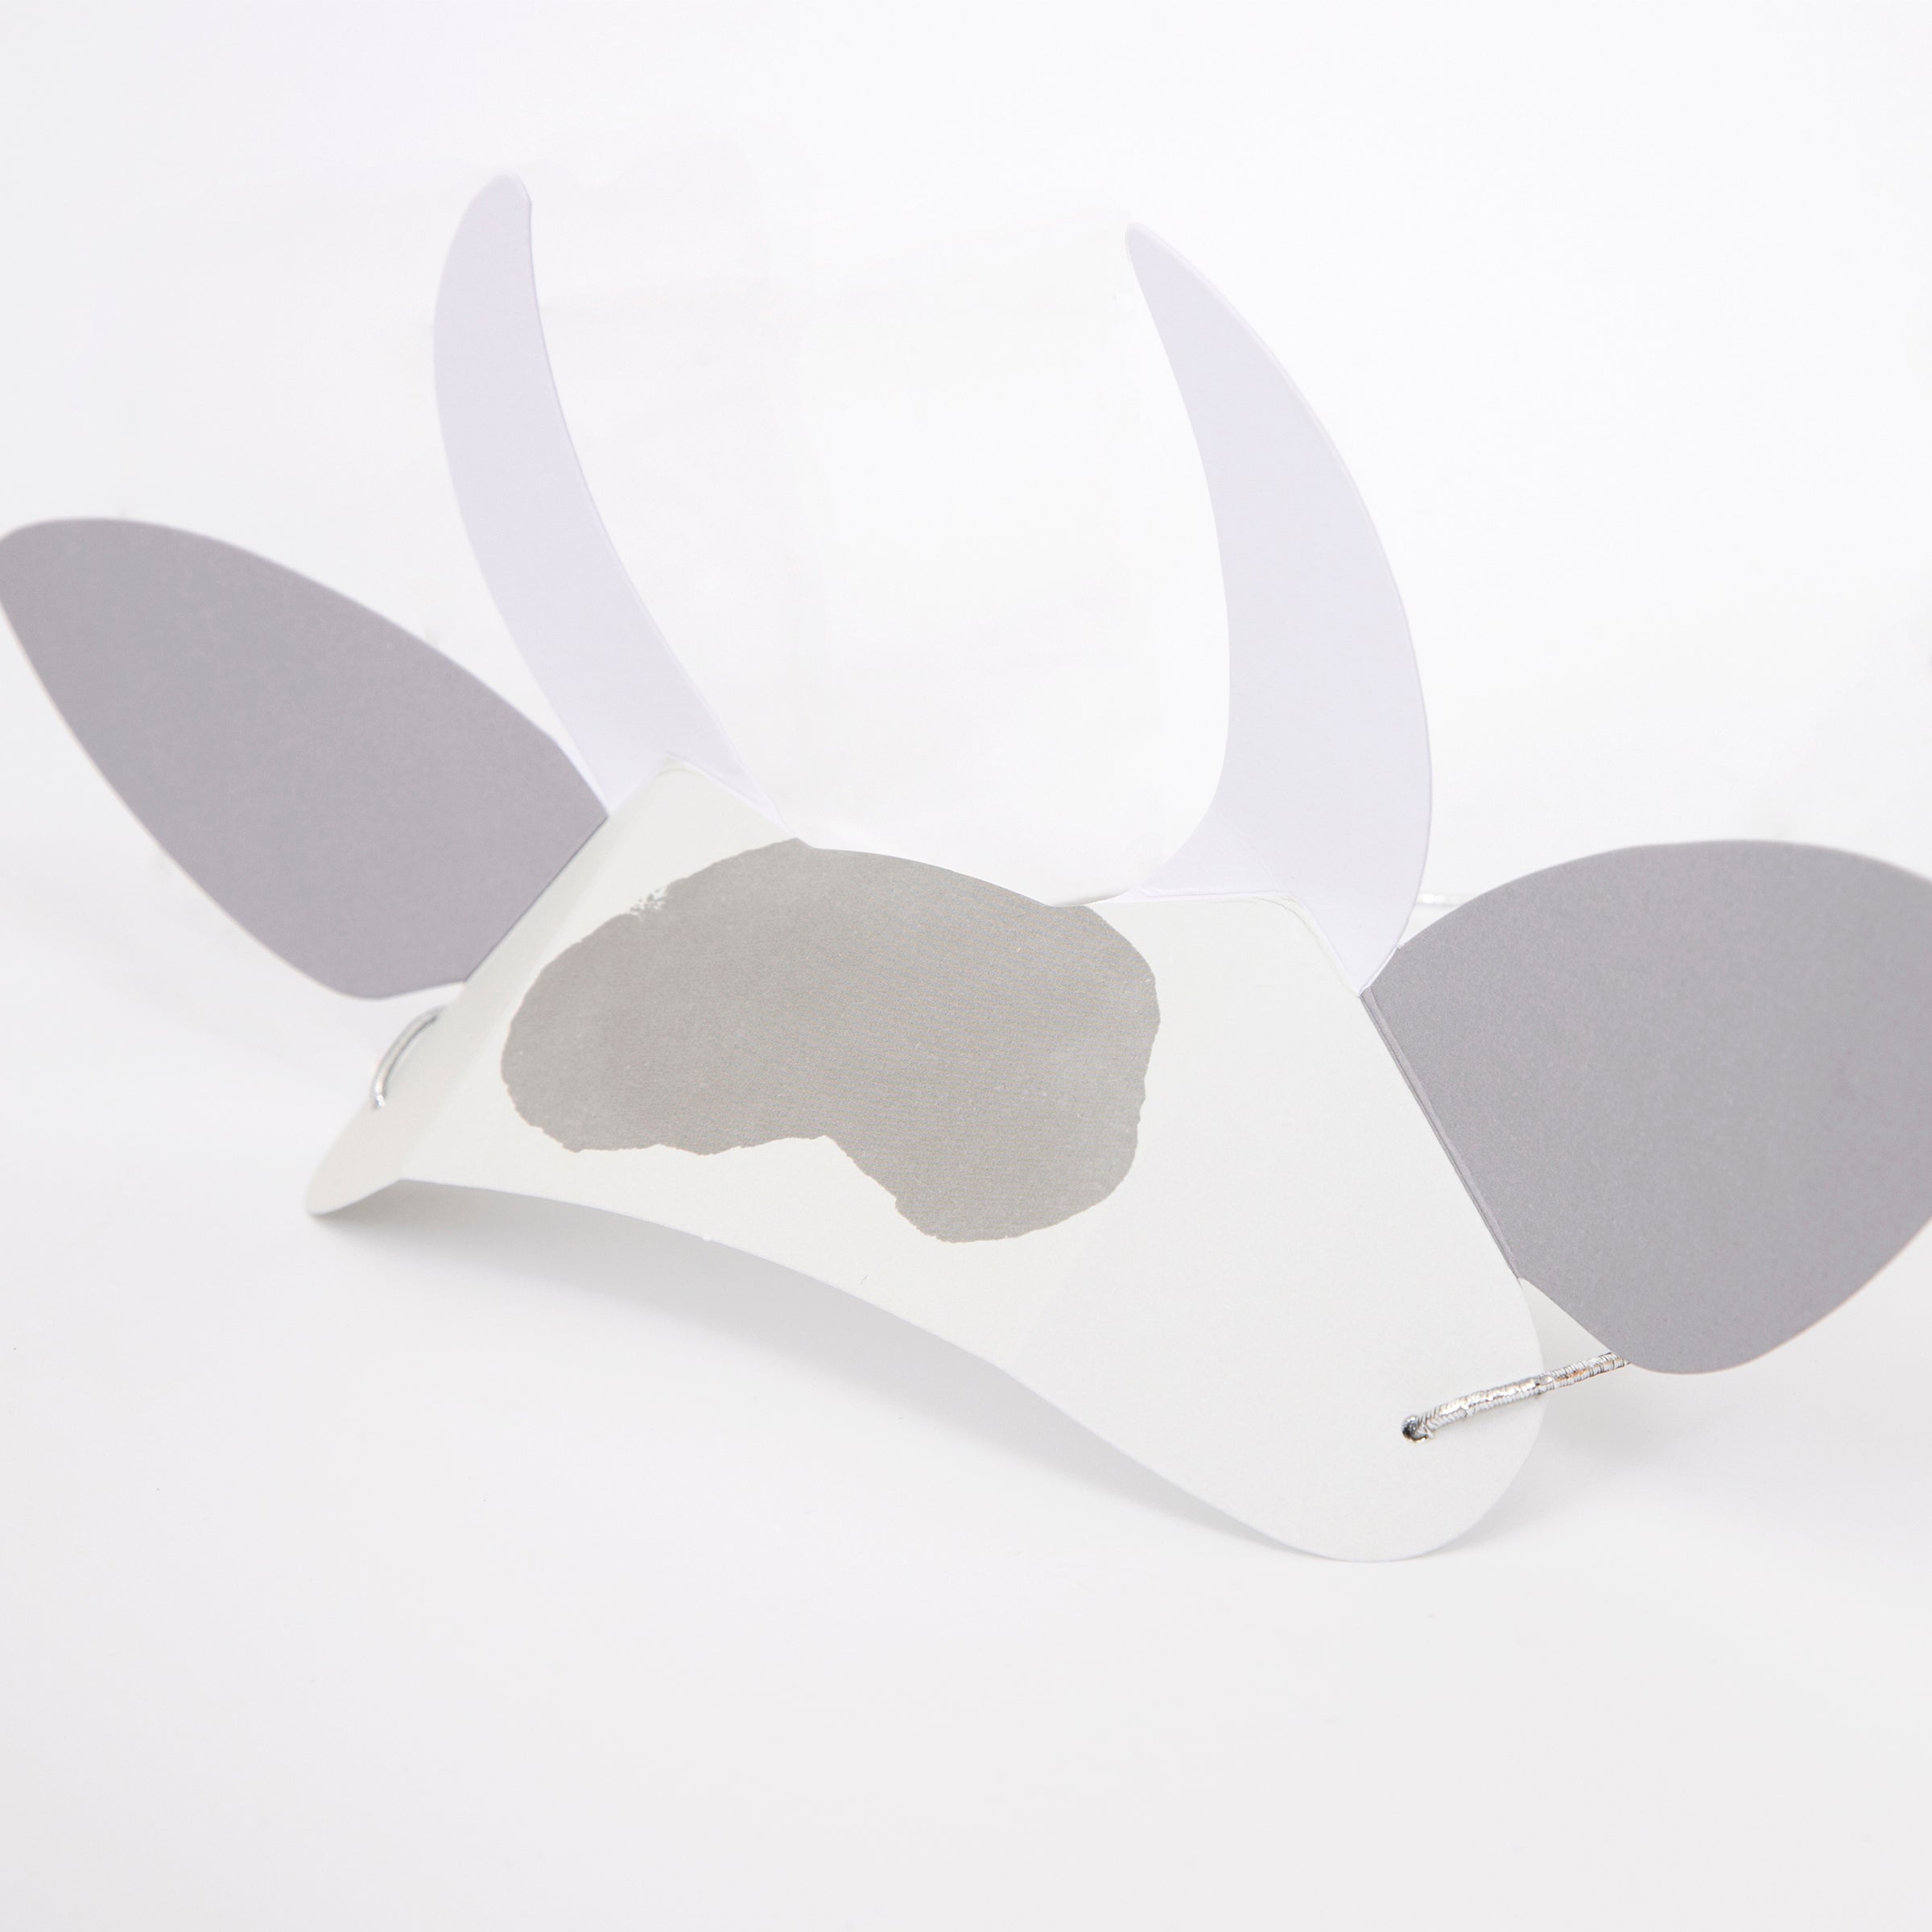 Kids will love to wear these paper party ears - cow, pig and sheep - at your farm party.